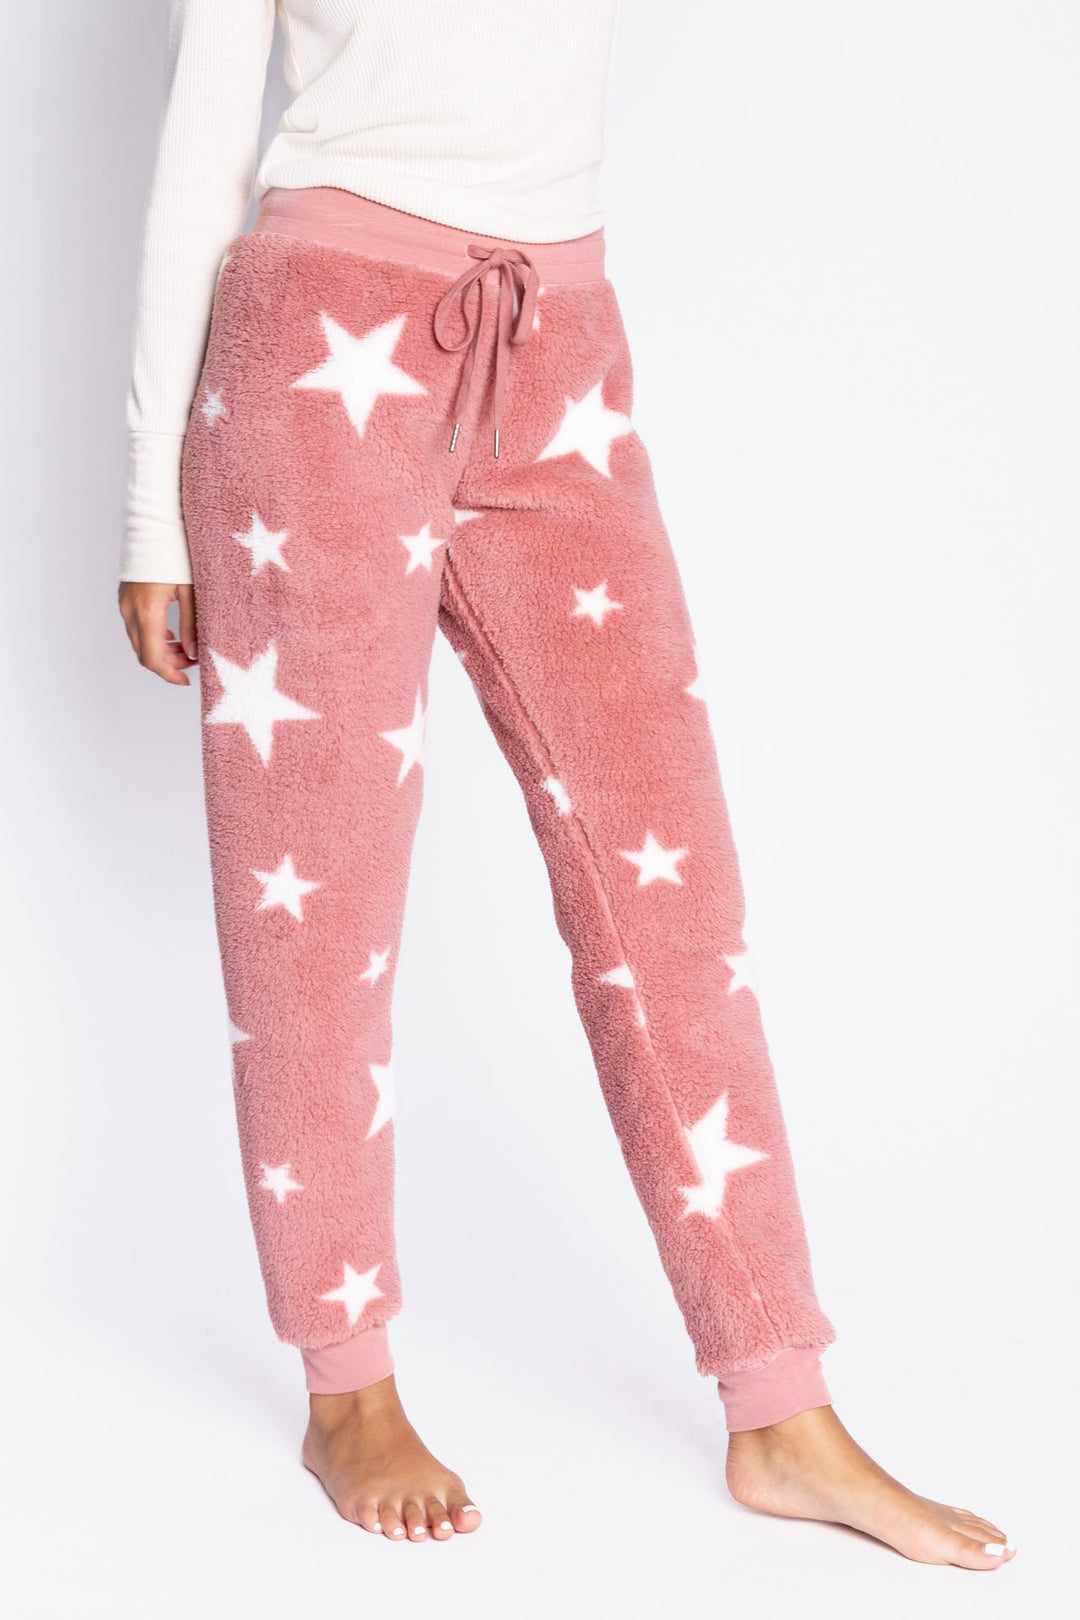 Pale pink & star-print faux fur cozy pant. Banded rib knit bottom & waistband with tie. (6982902218852)